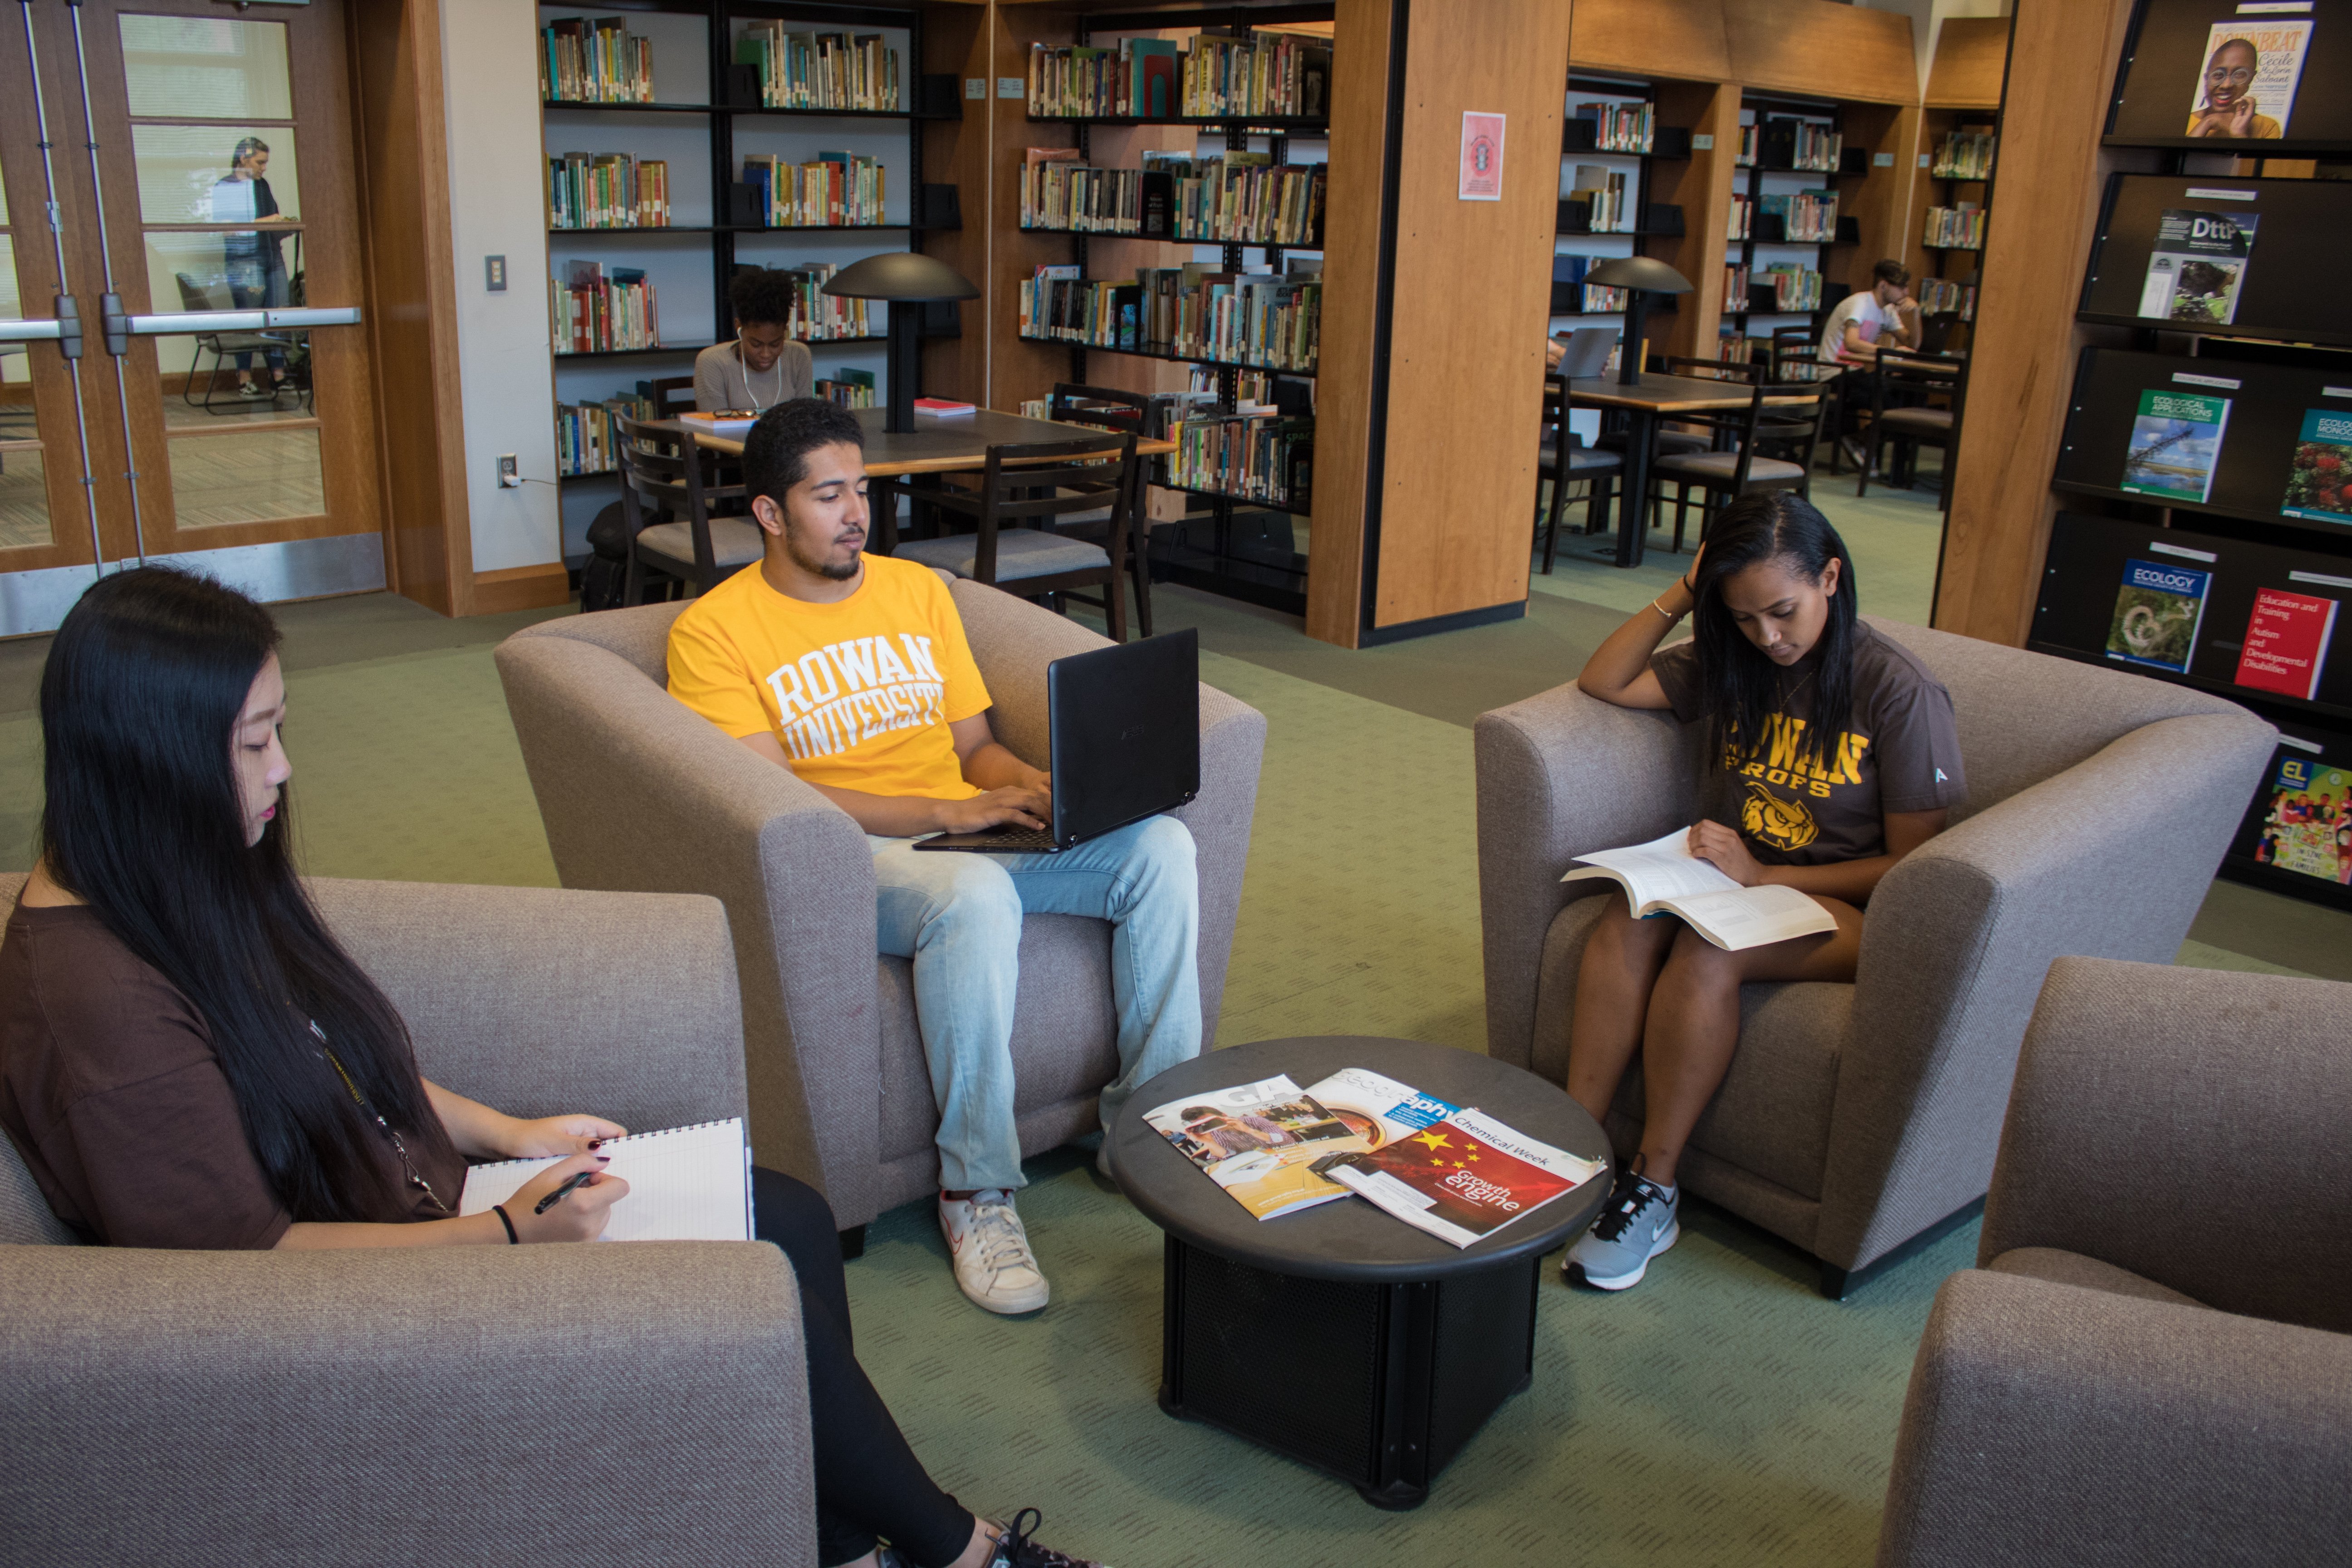 Three students sitting on chairs in the library.